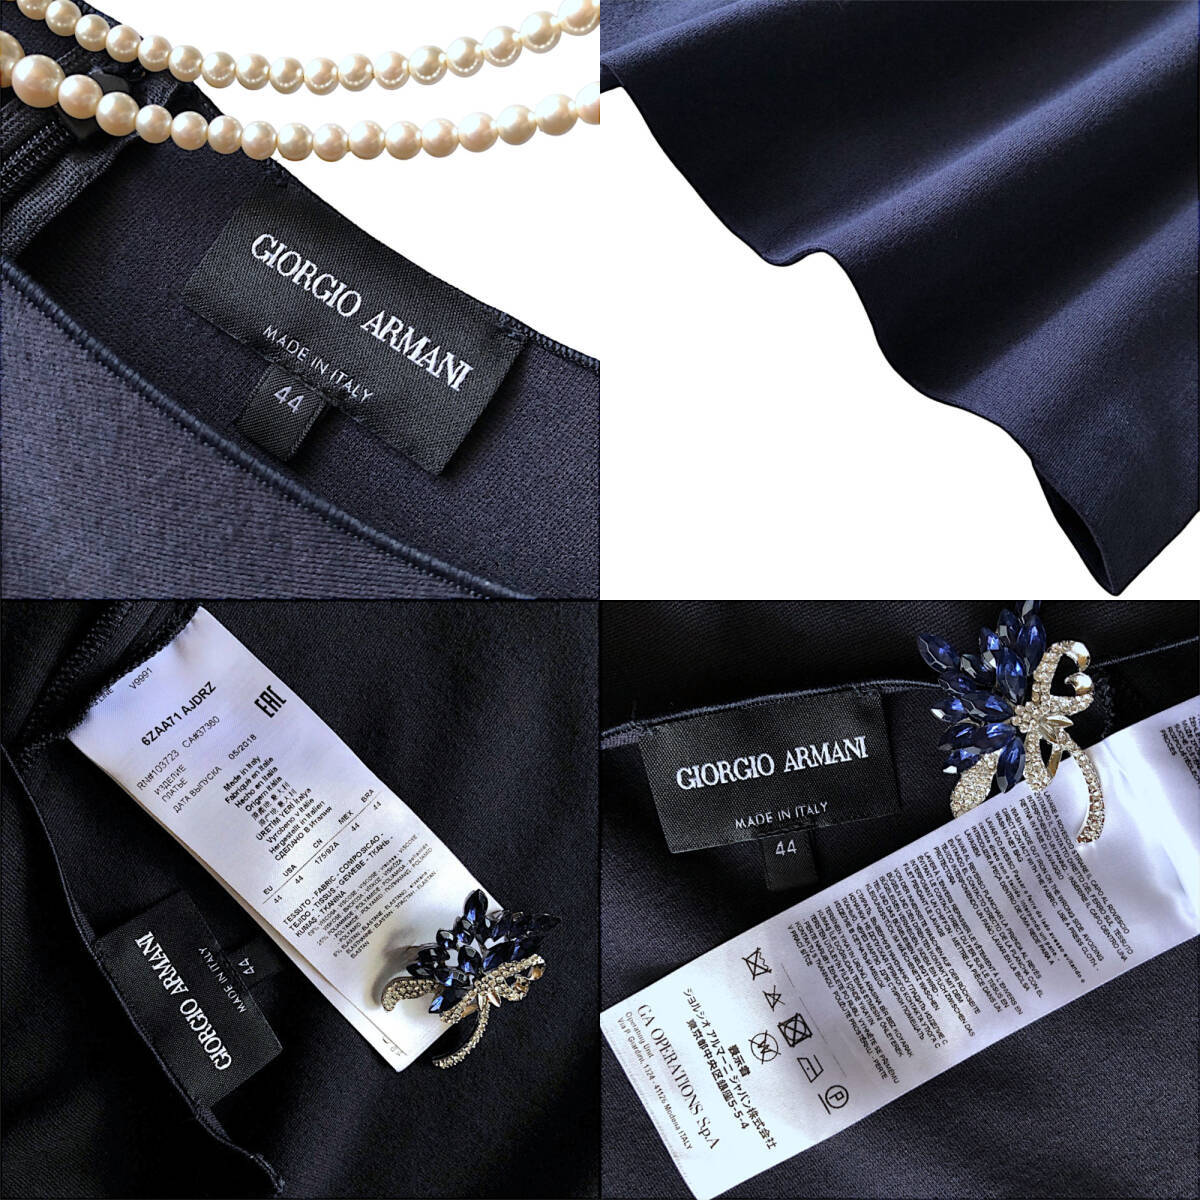 D16* ultimate beautiful goods joru geo Armani GIORGIO ARMANI 44 M-L rom and rear (before and after) One-piece beautiful line Silhouette flexible stretch equipped top class line navy blue 